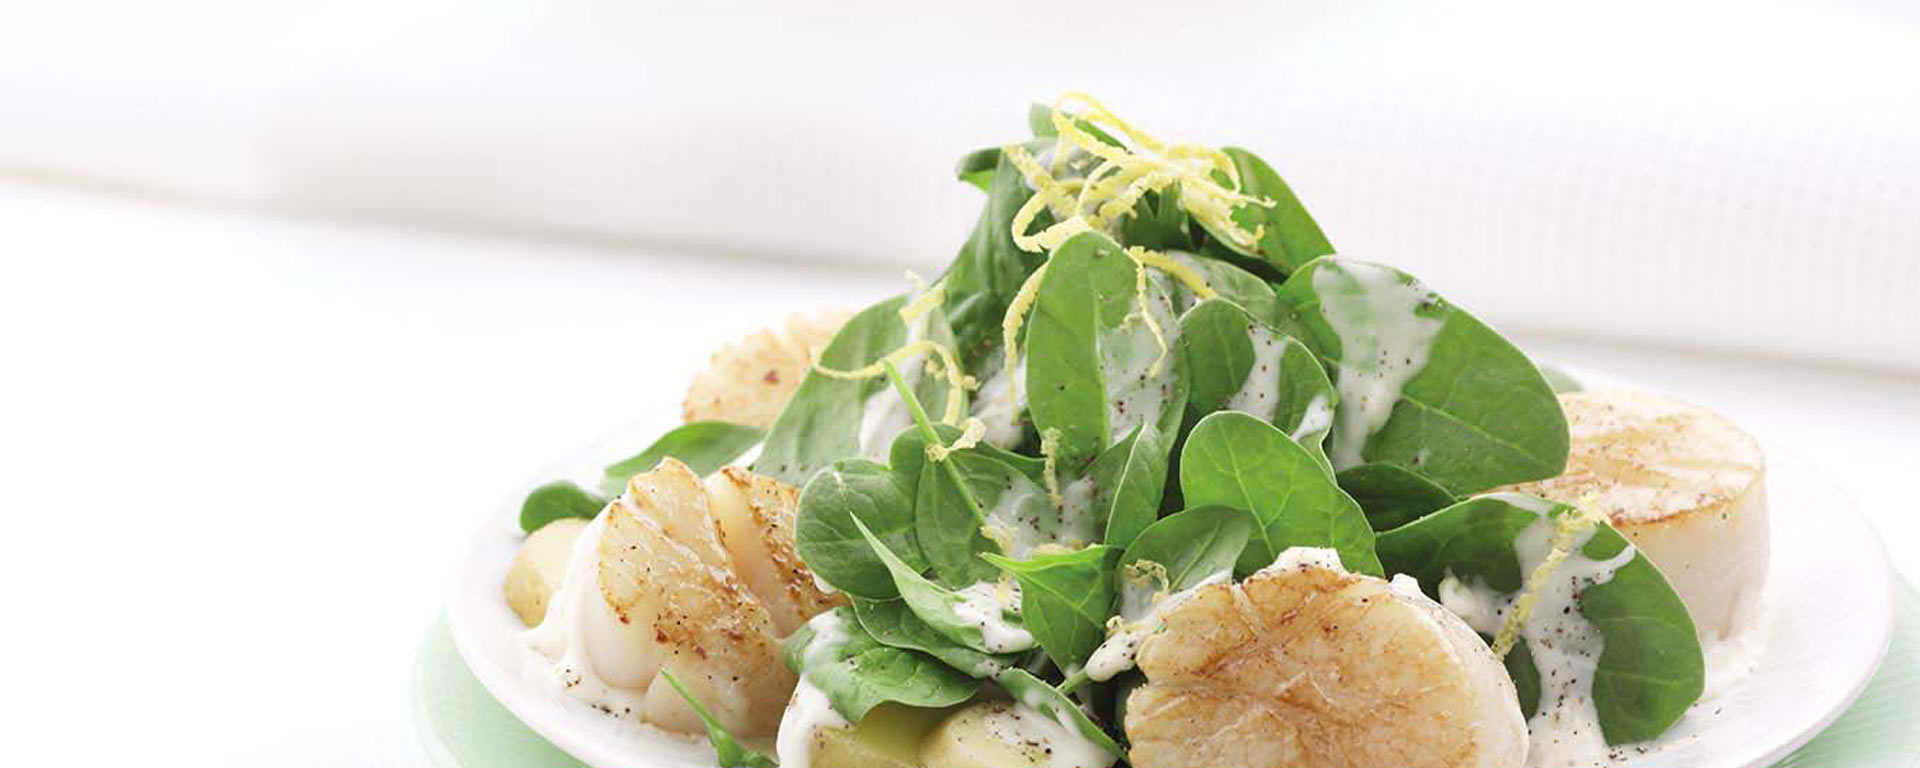 Photo of - Seared Scallops with Baby Spinach and Potatoes